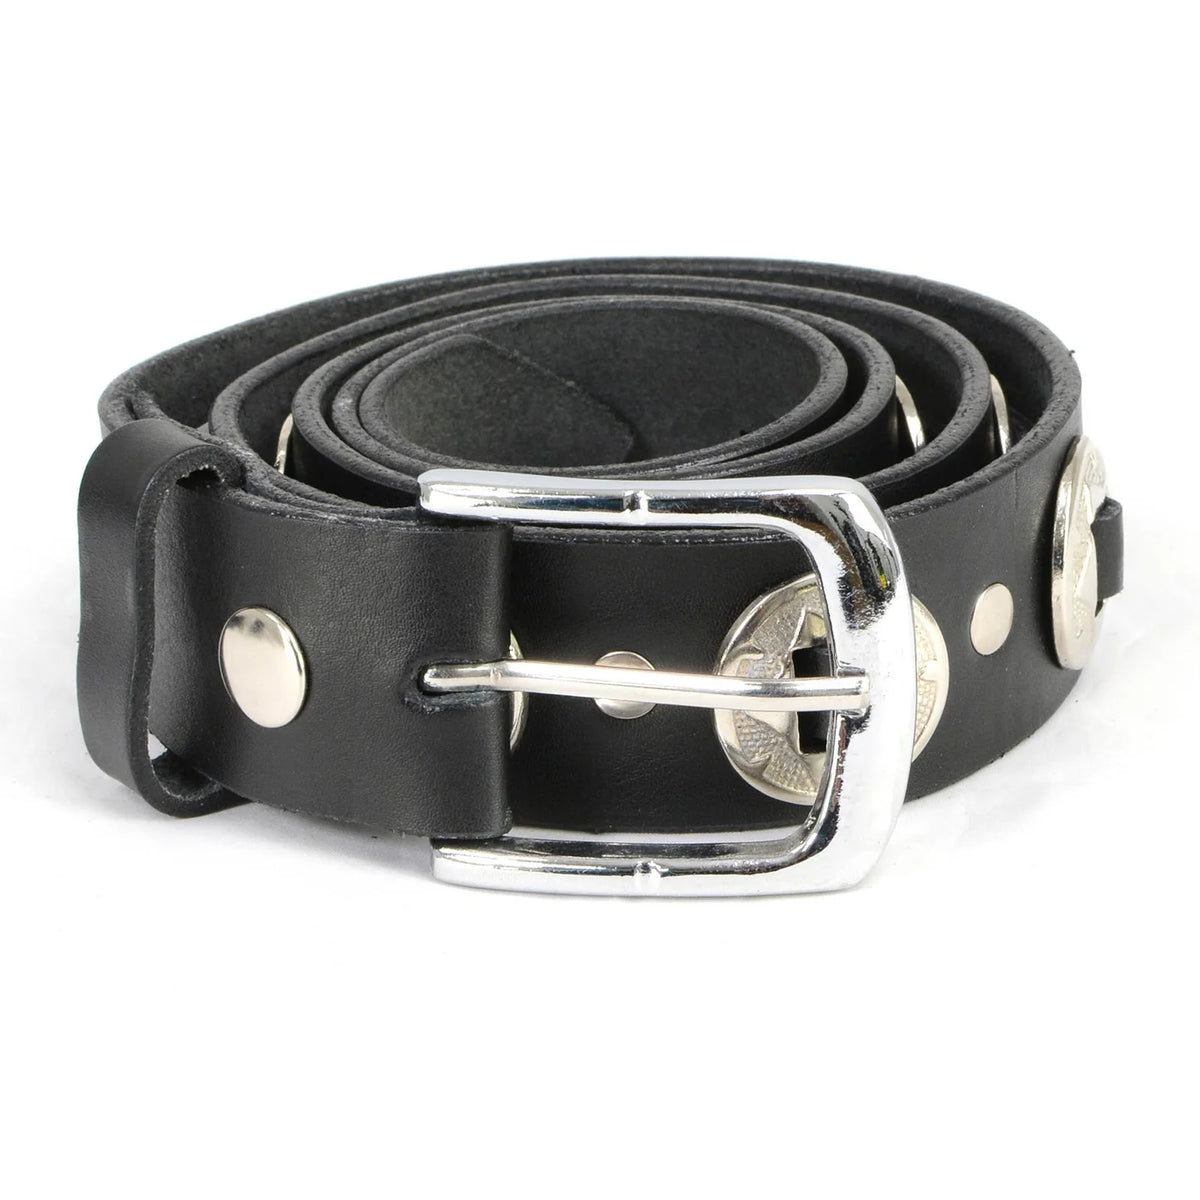 Chicos Womens Belt Black Silver Toggle Clasp Buckle Gen Leather RN